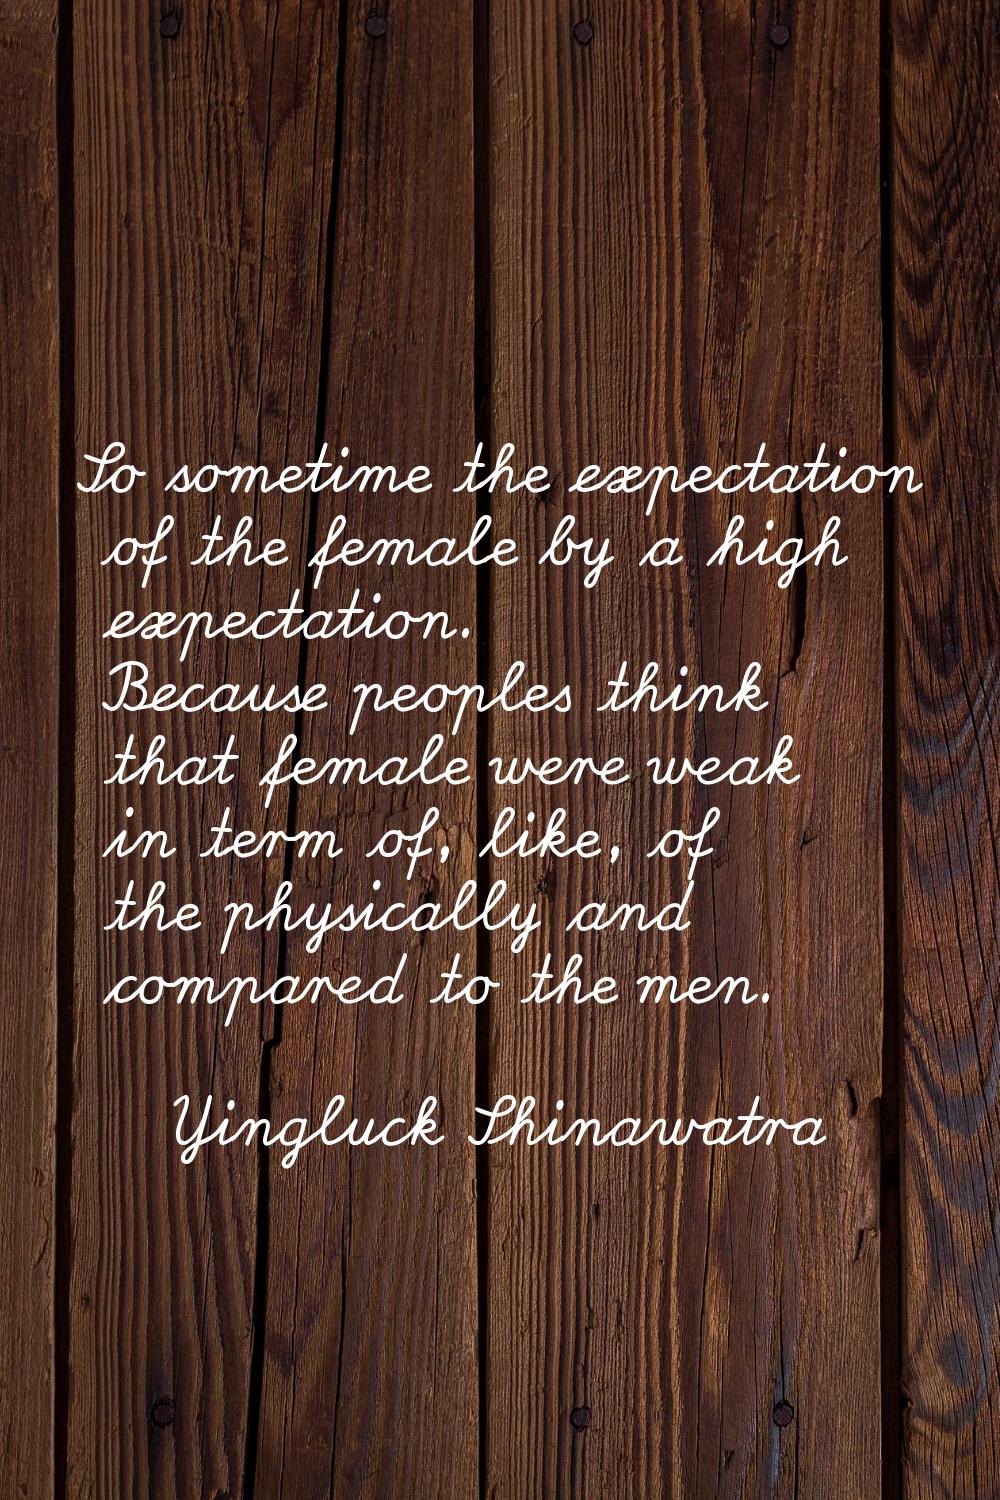 So sometime the expectation of the female by a high expectation. Because peoples think that female 